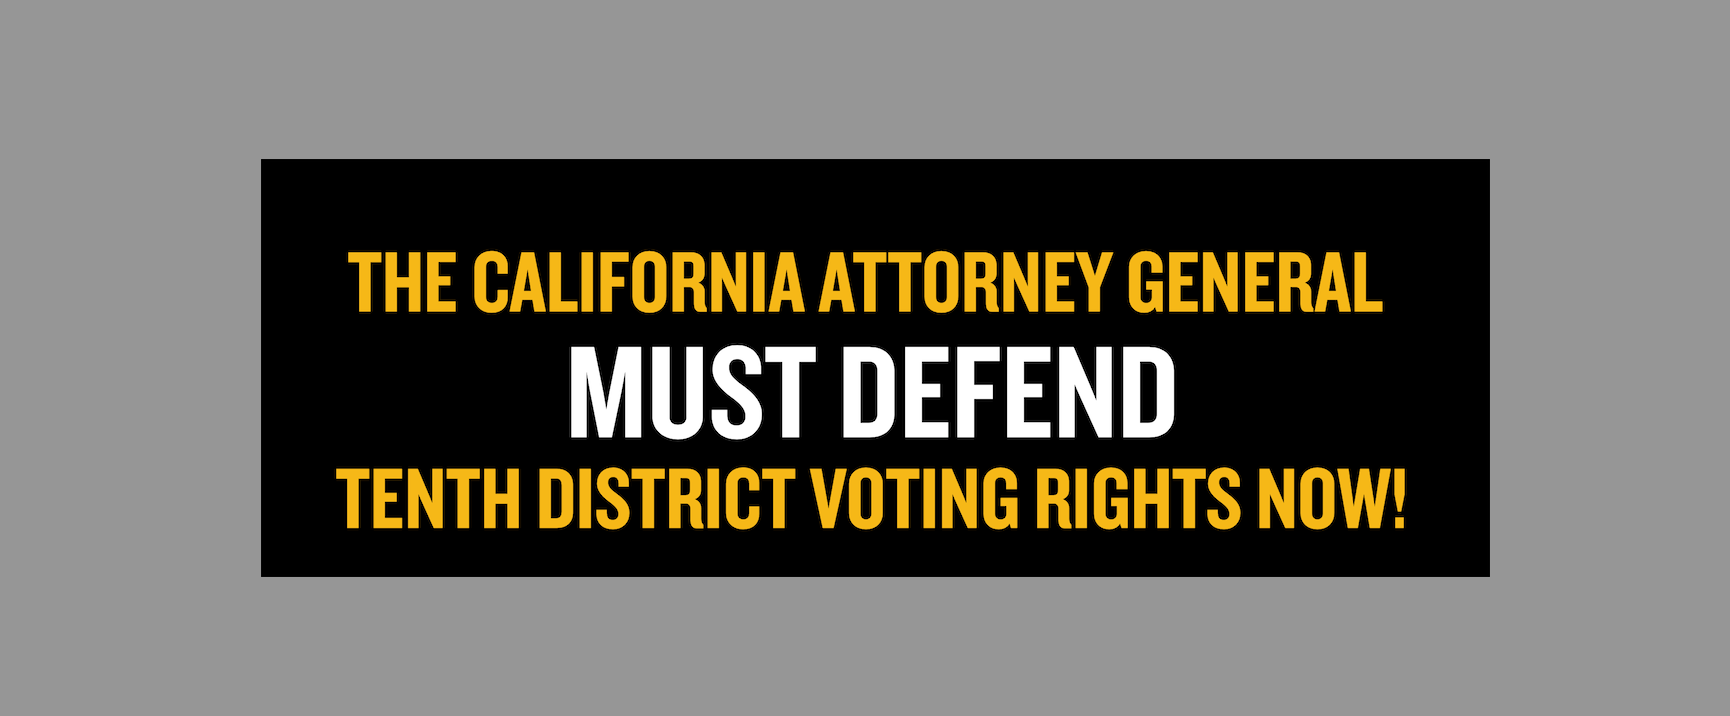 CA Attorney General Rob Bonta Must Defend 10th District Voting Rights Now!